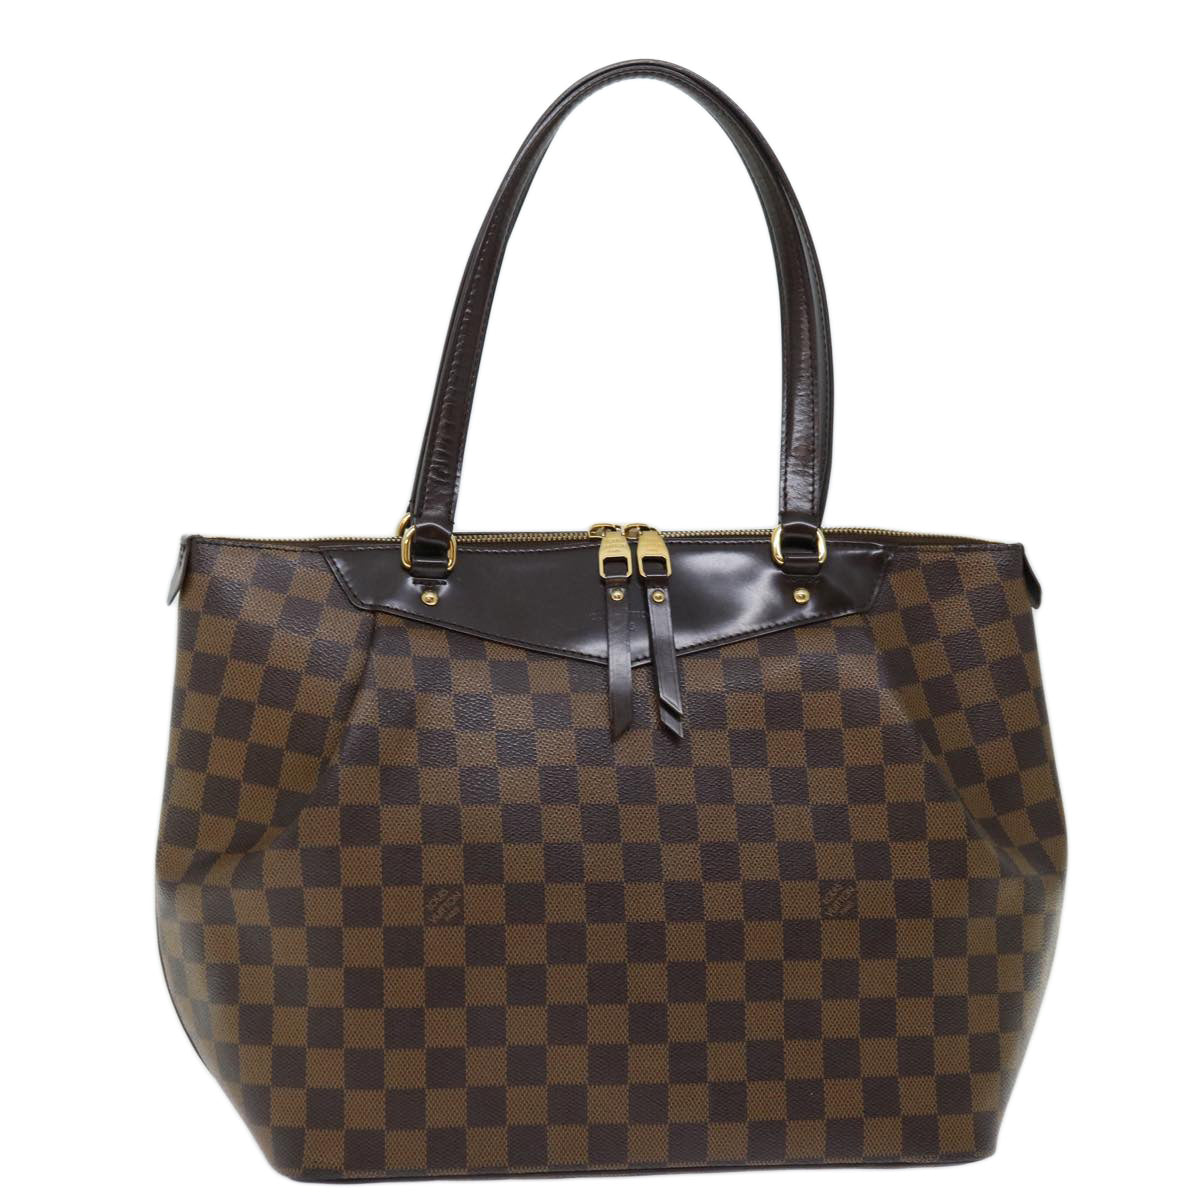 LOUIS VUITTON Damier Ebene Westminster GM Tote Bag N41103 LV Auth 67648A